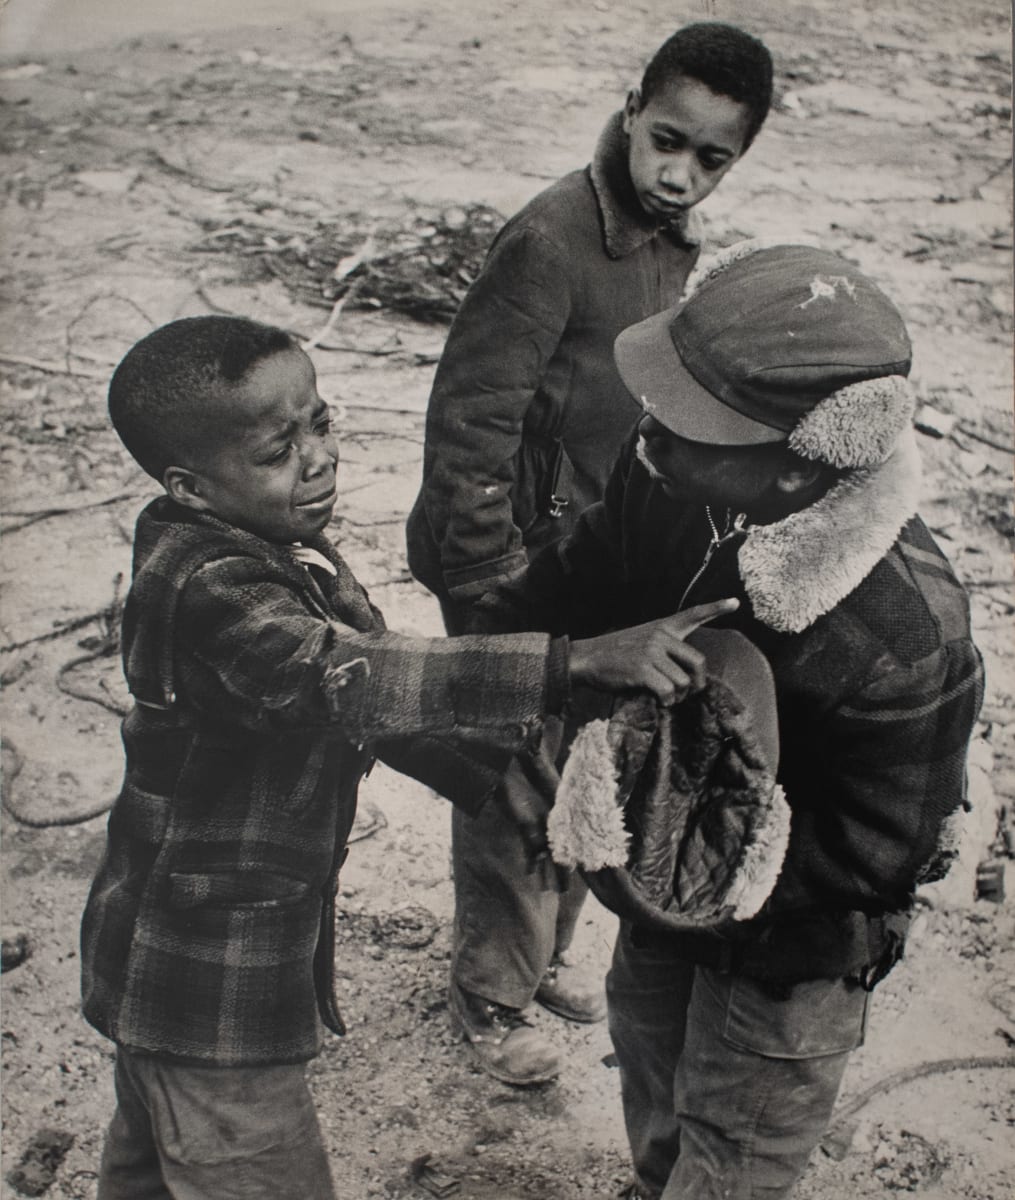 He Hit Me Harlem Playground by Ken Heyman  Image: Three young black children, one is crying and pointing at another